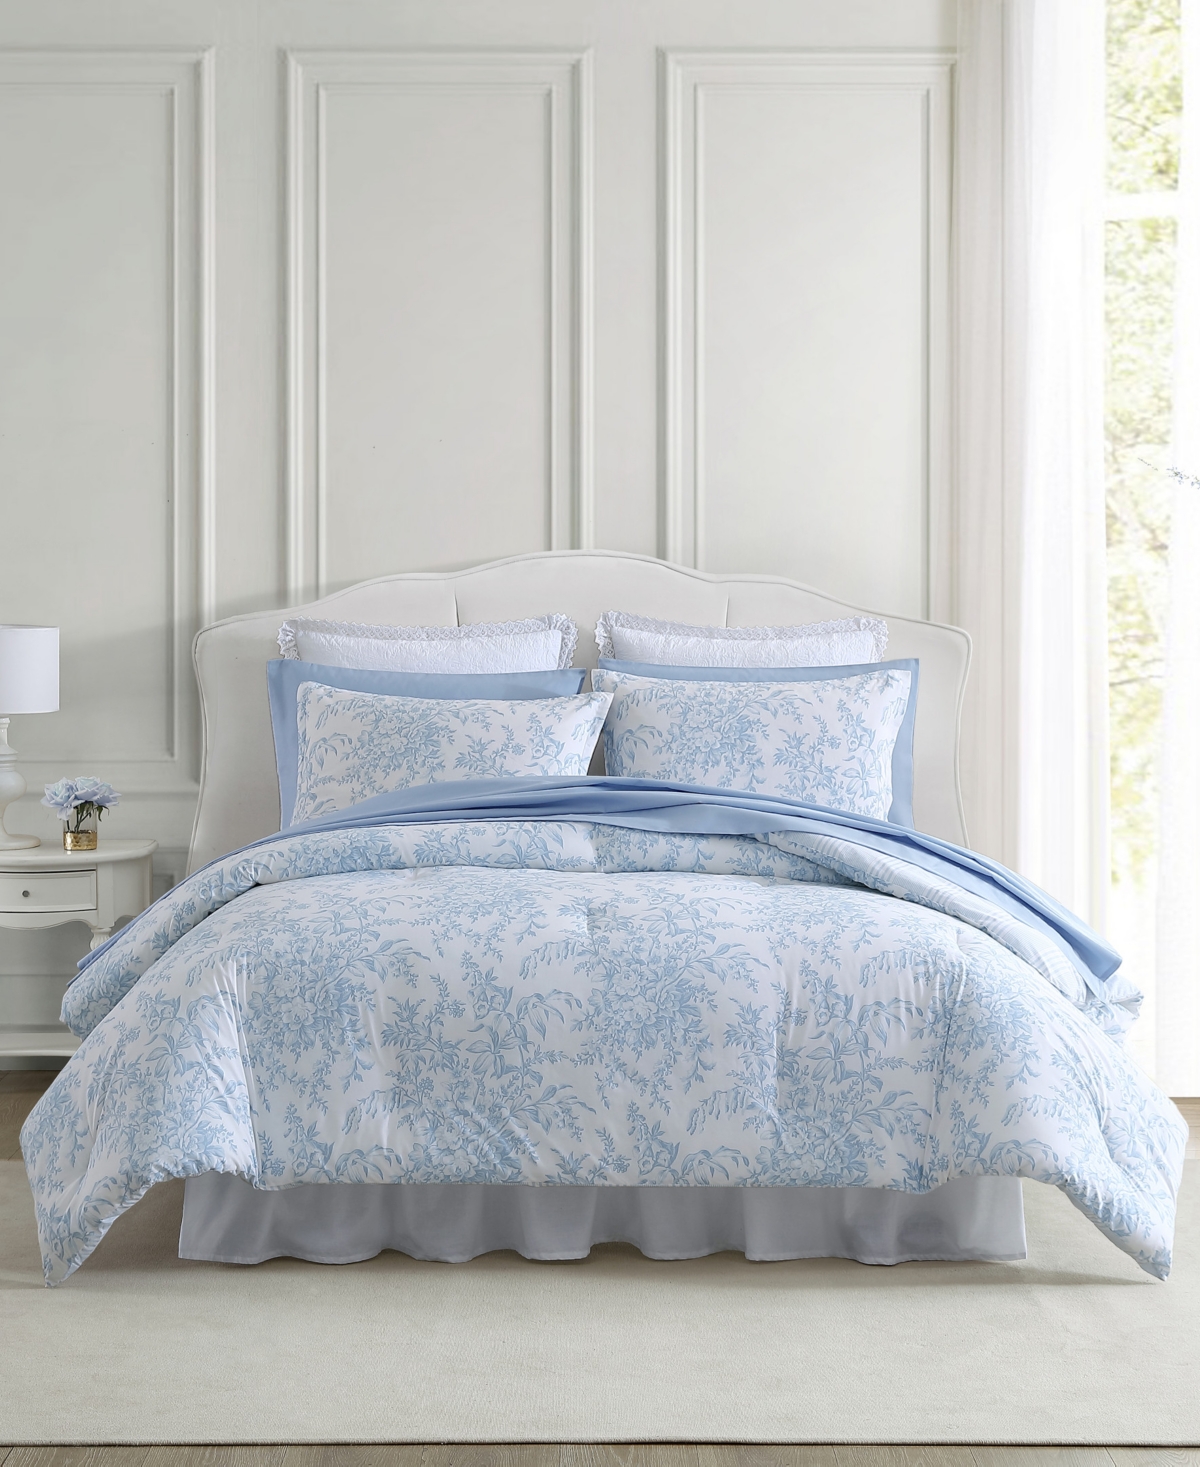 Laura Ashley Bedford Cotton Reversible 3 Piece Comforter Set, Full/queen In Blue Cashmere,white